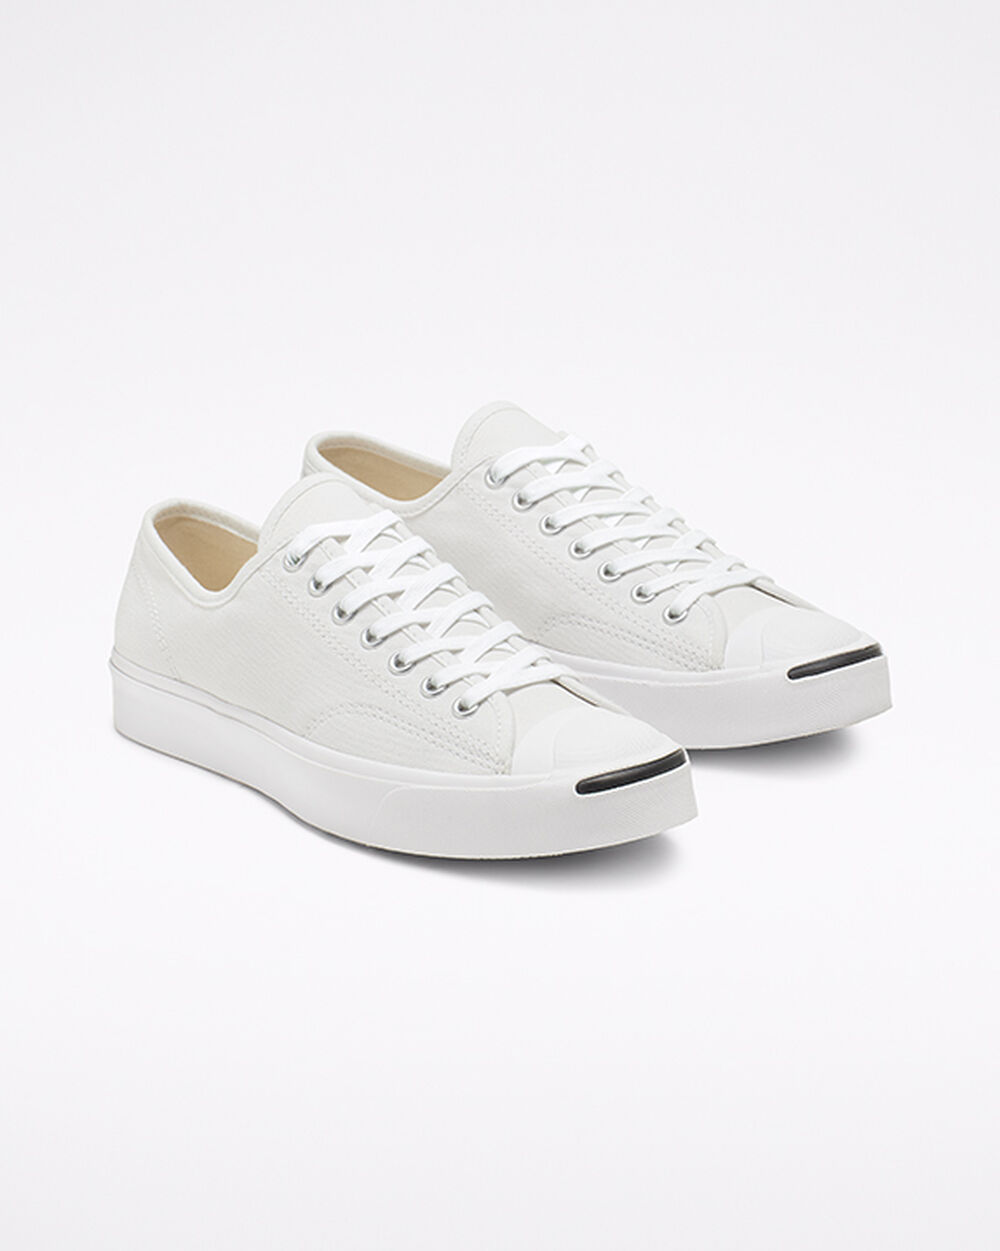 Tenis Converse Jack Purcell Mujer Blancos Negros | Mexico-835646